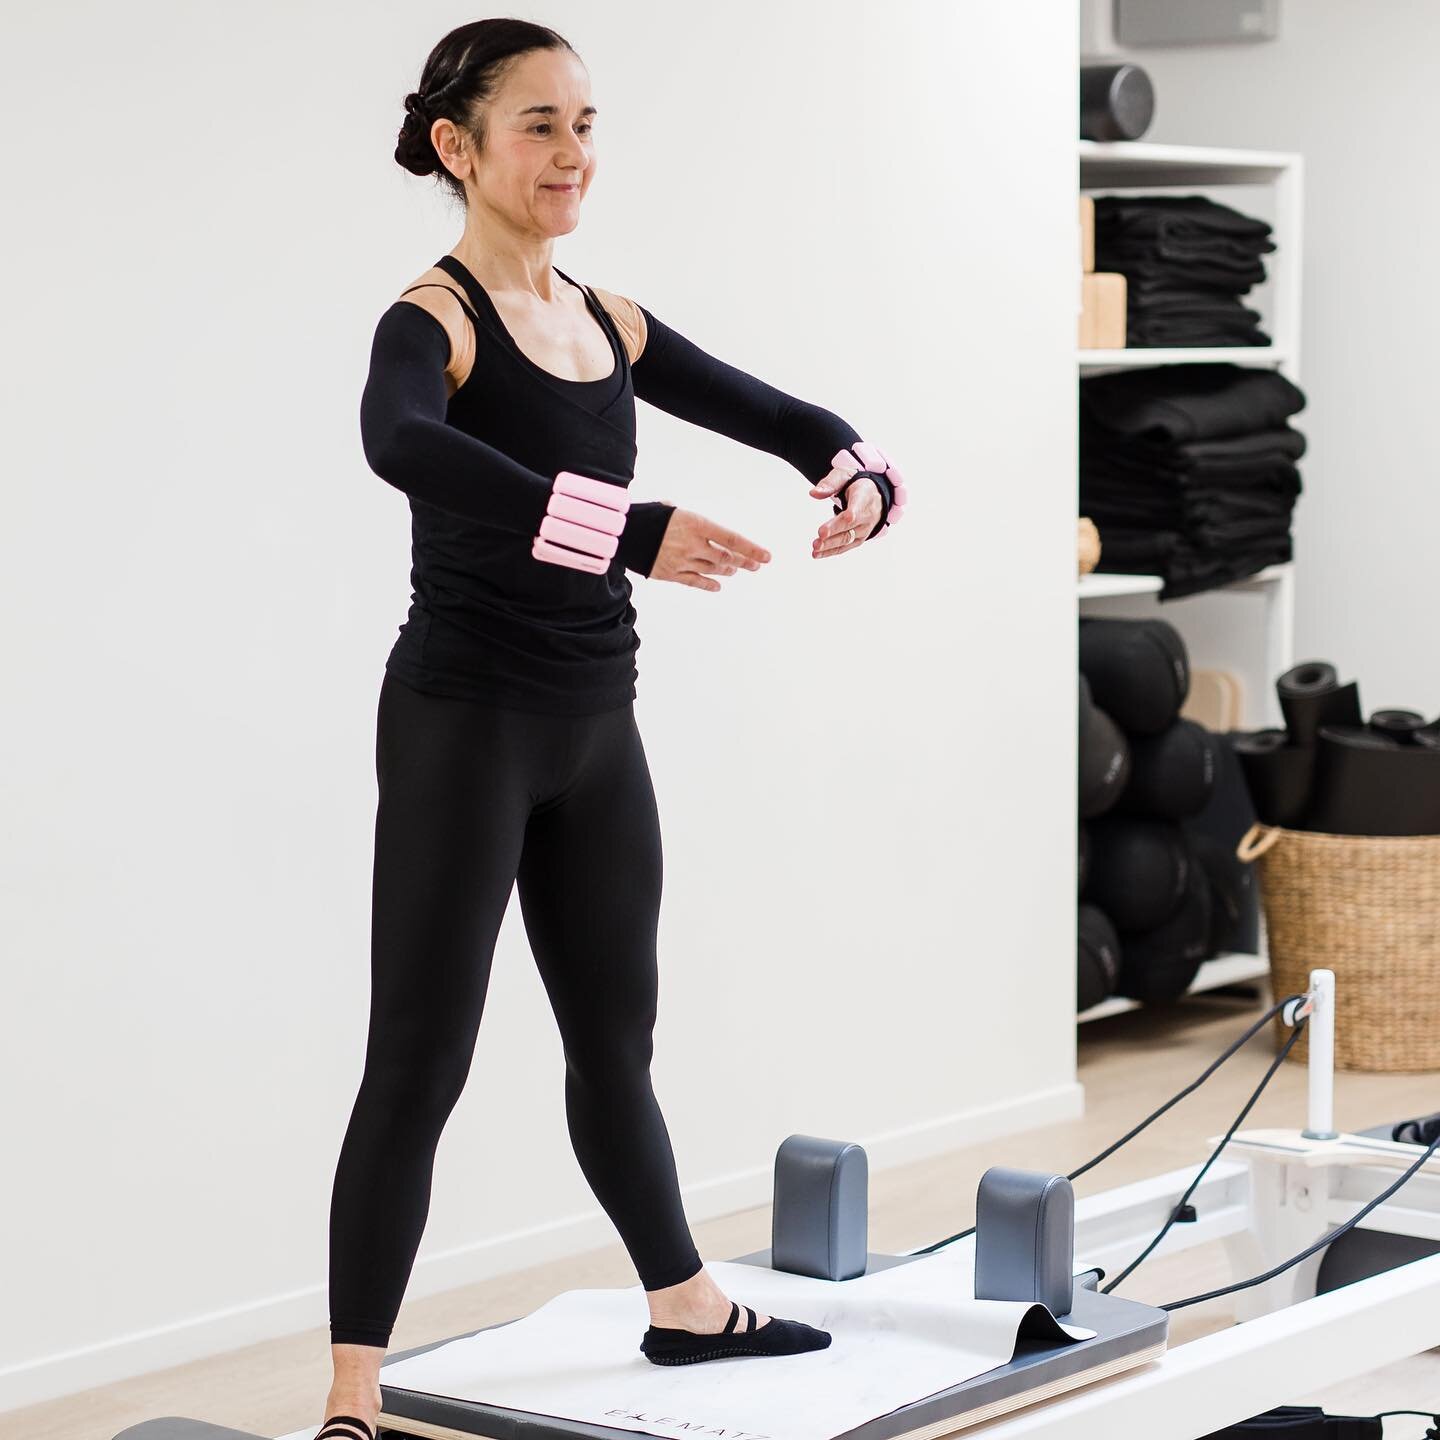 🖤 A shout out to the lovely @rosjoyh !!

💫 Here she is pictured working hard and mindfully, while having fun at @boutiqueballetpilates on the reformer, at the barre and on the mat! She would have to be one of the most dedicated adult ballet dancers